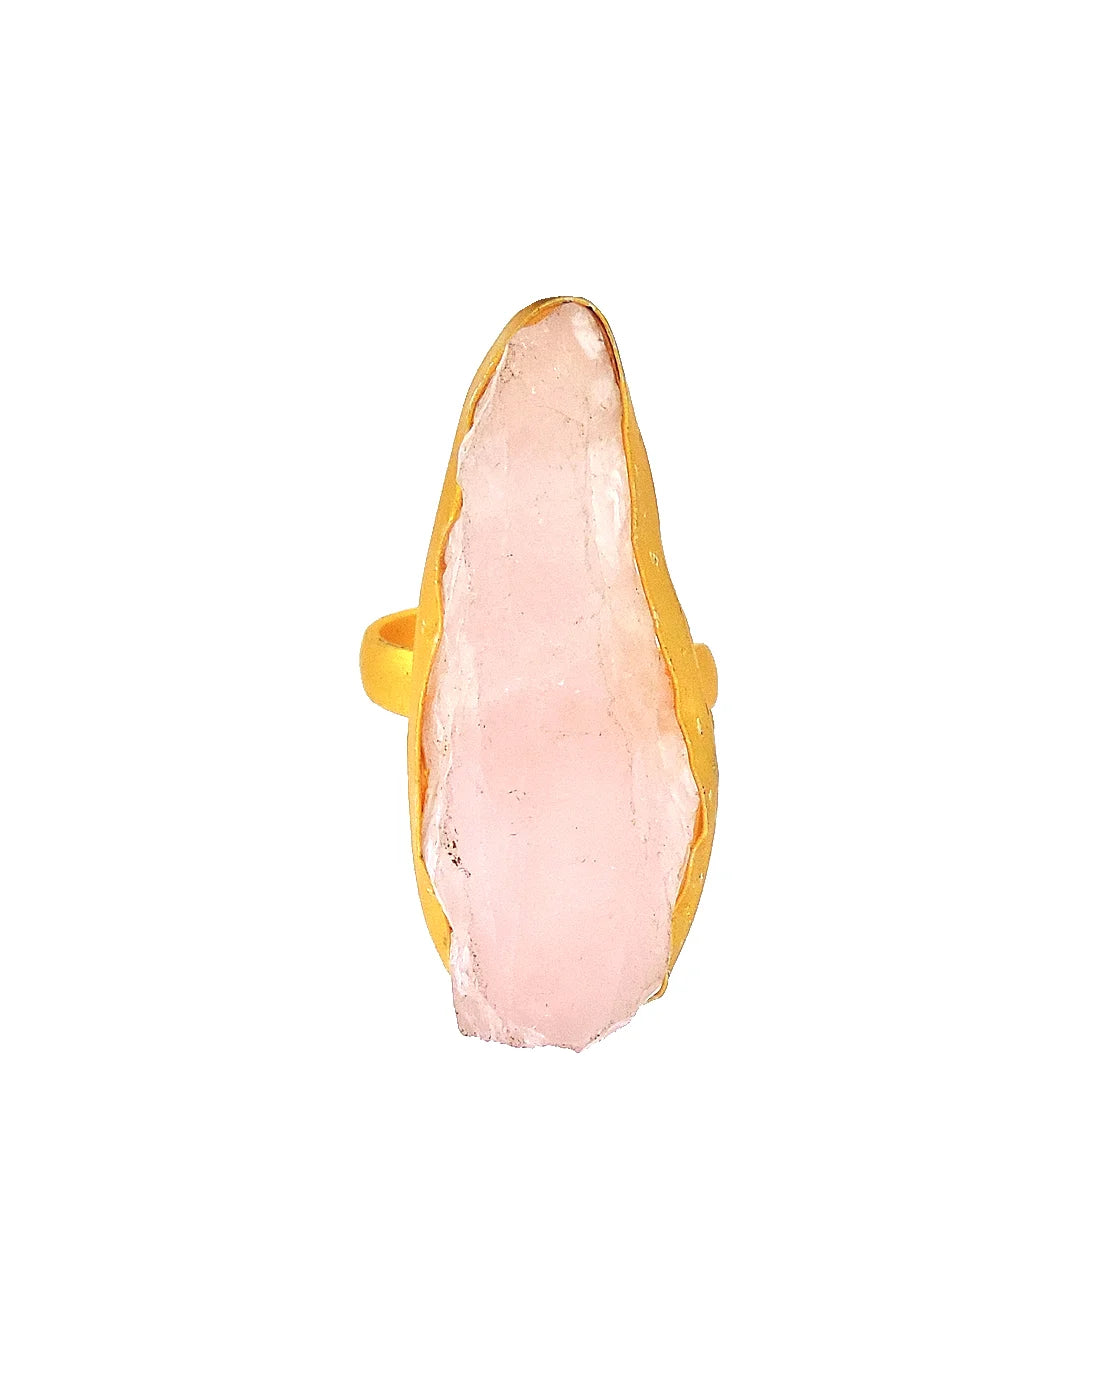 Abstract Rose Quartz Ring- Handcrafted Jewellery from Dori